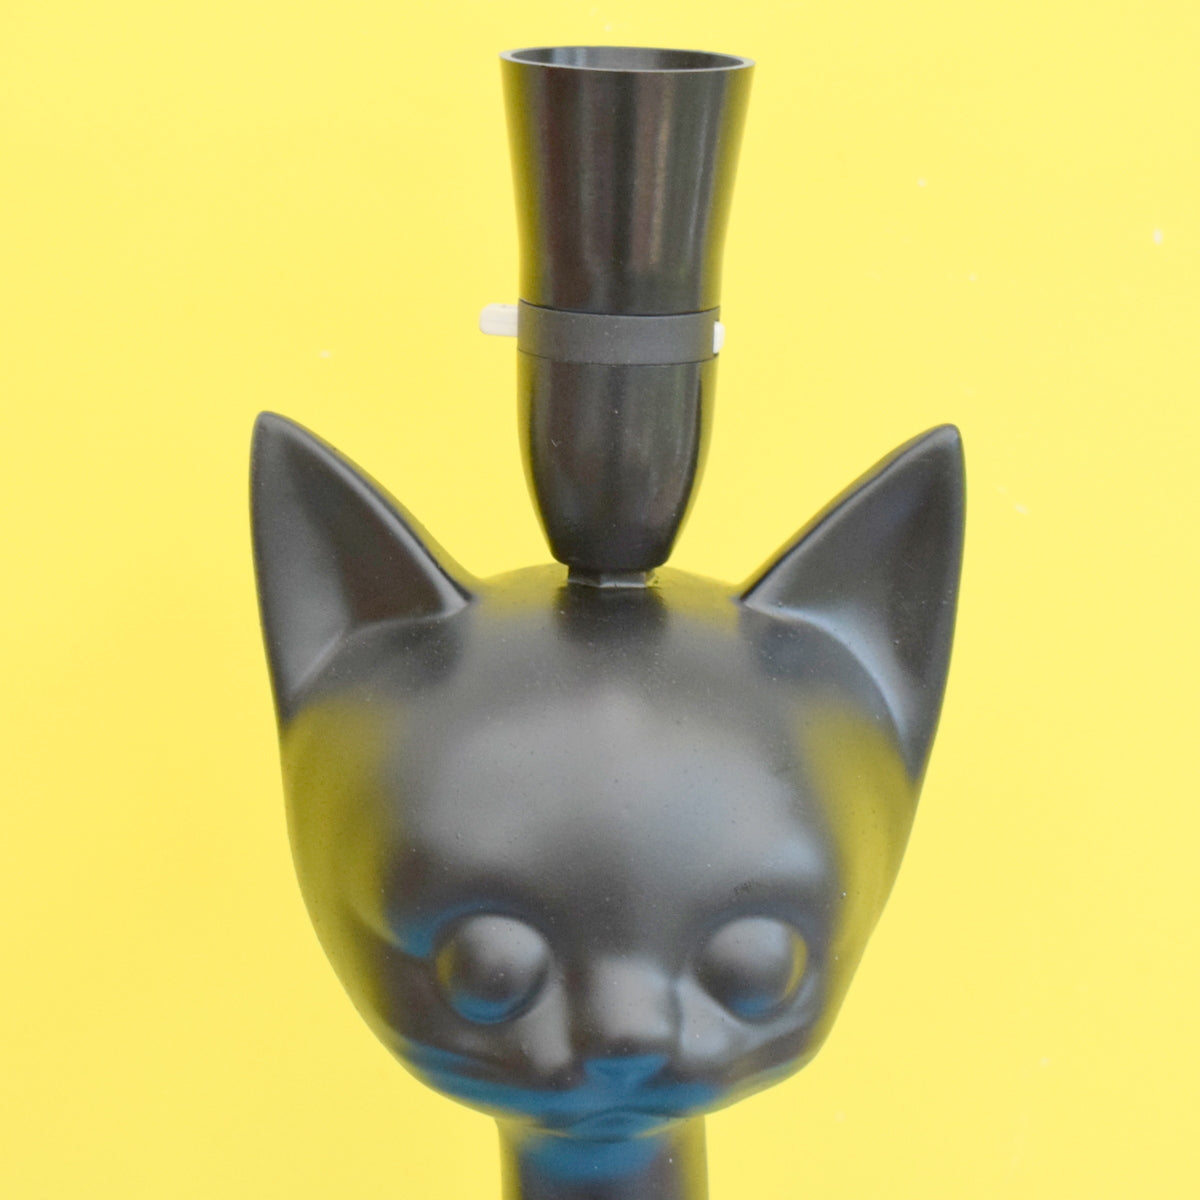 Vintage 1950s Very Large Ceramic, Tall Necked Cat Lamp - Black